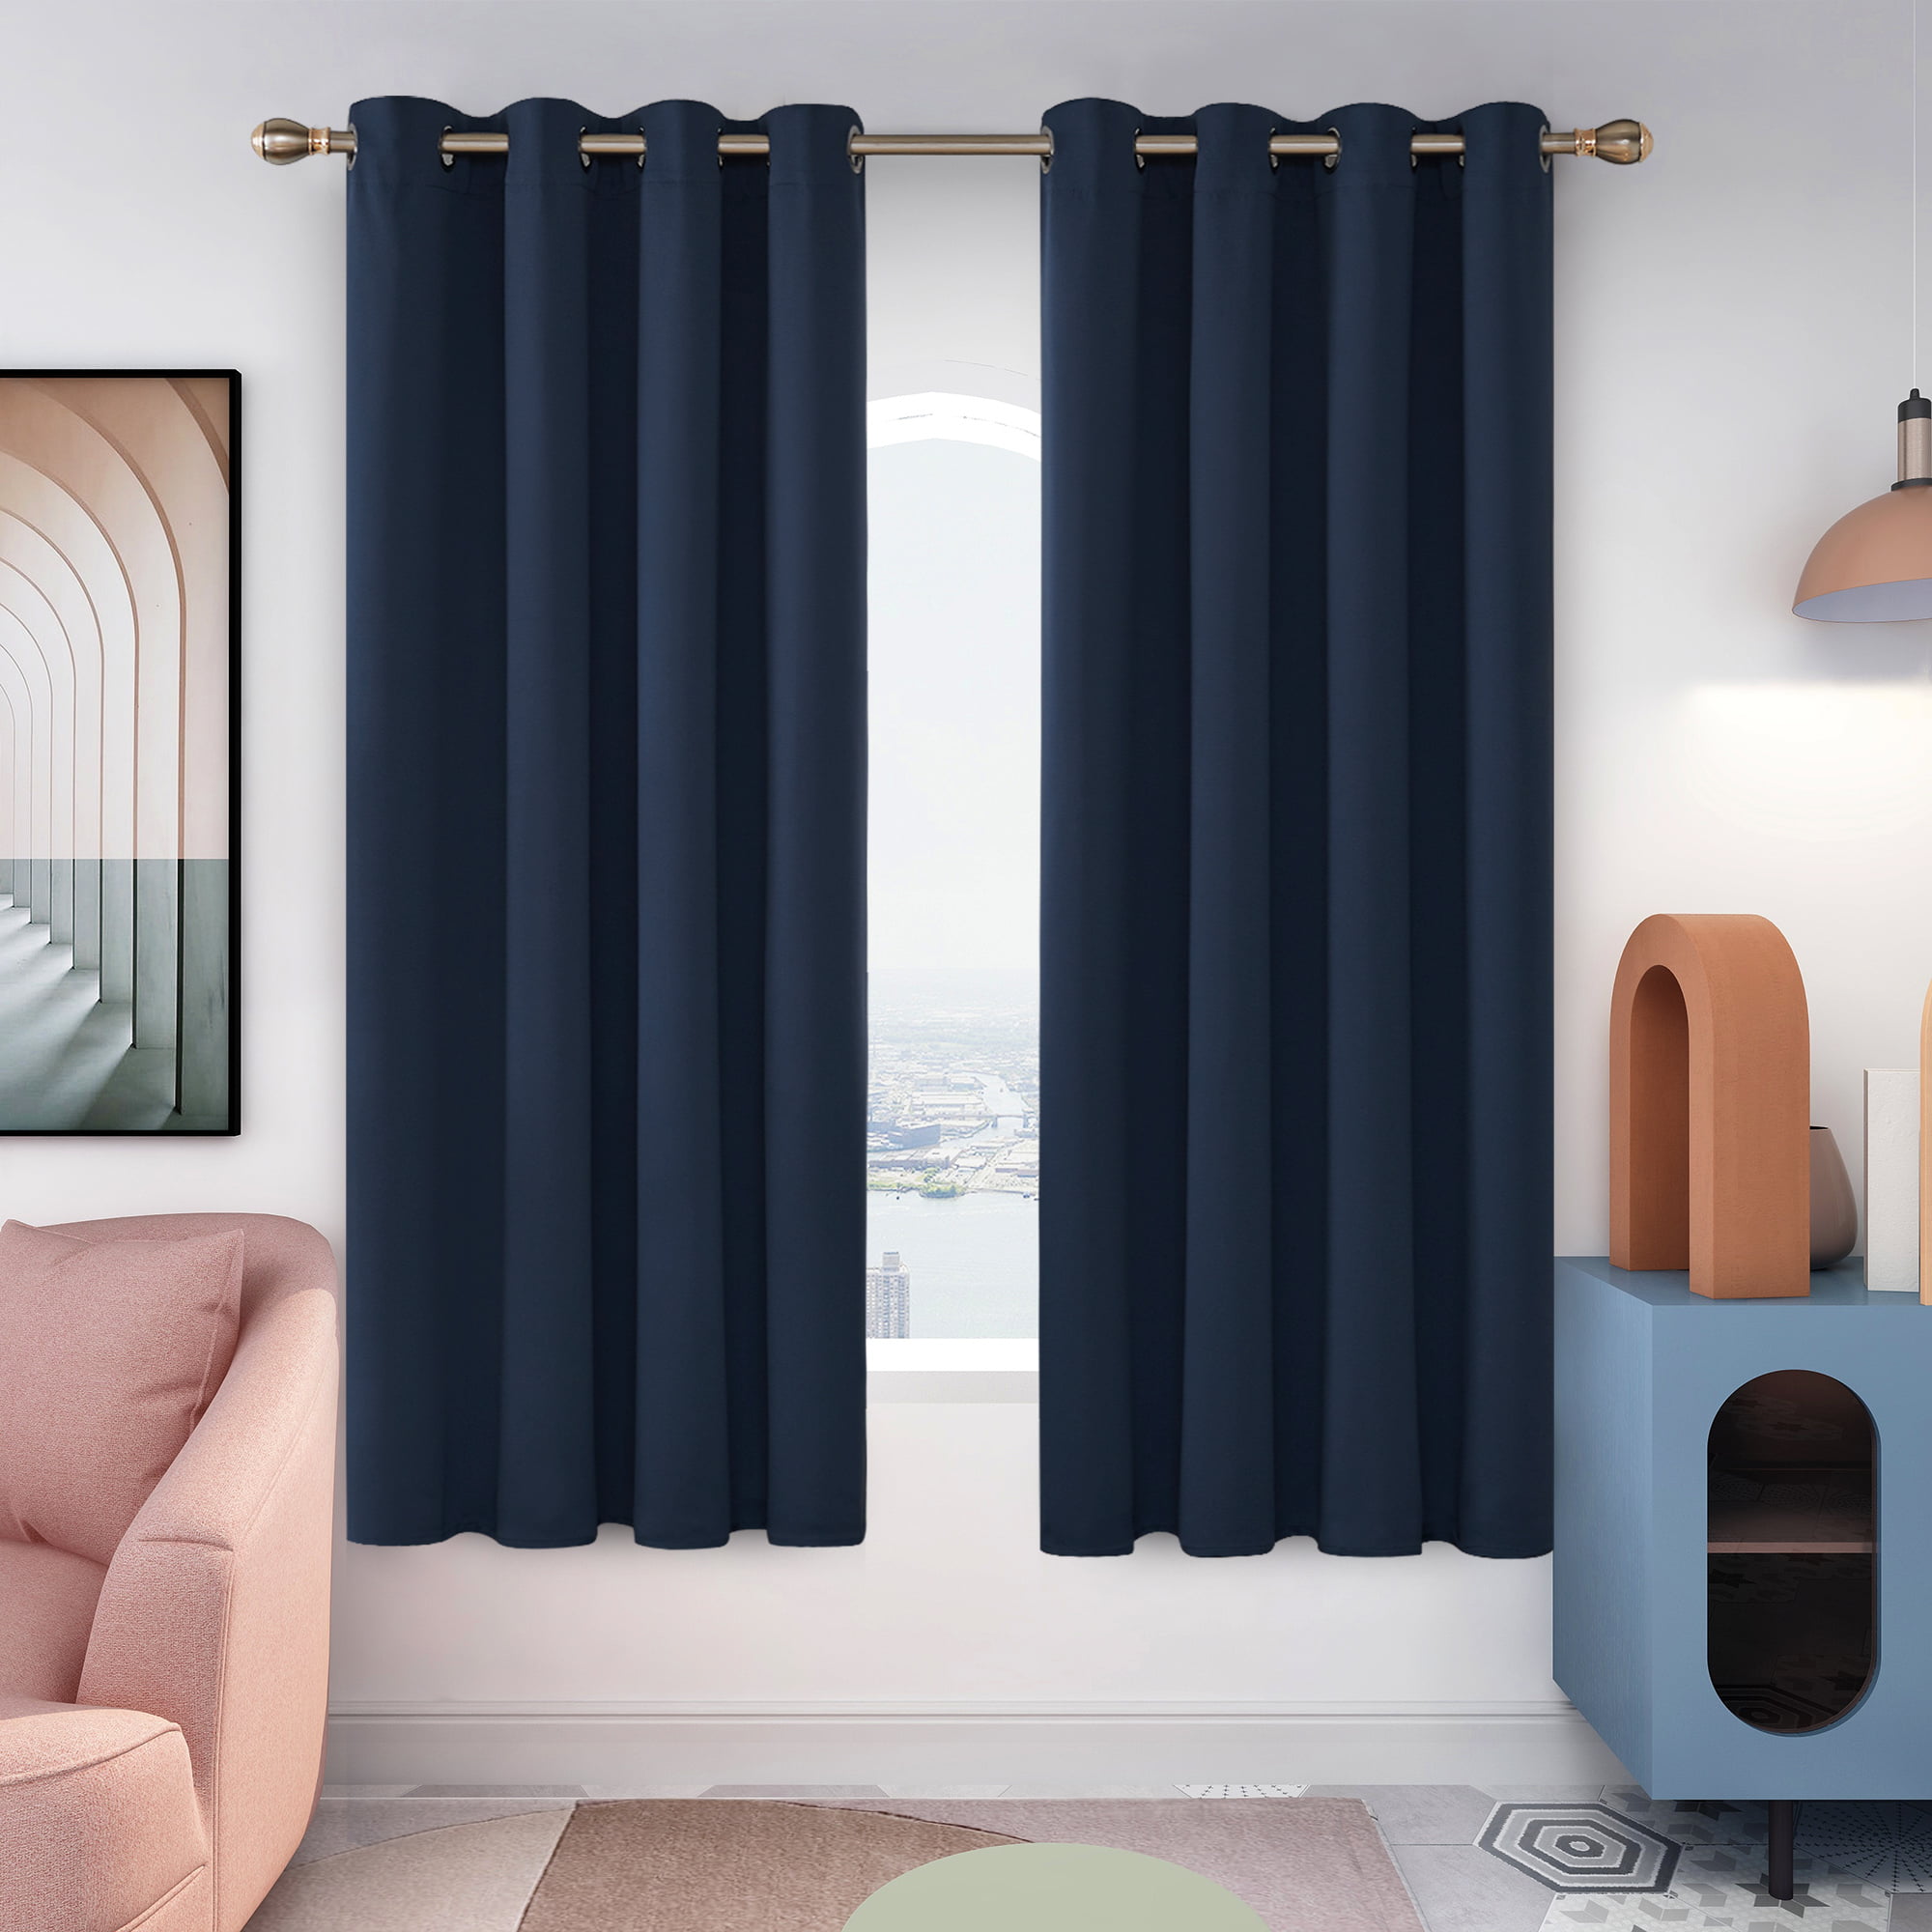 What is the difference between blackout curtains and regular curtains